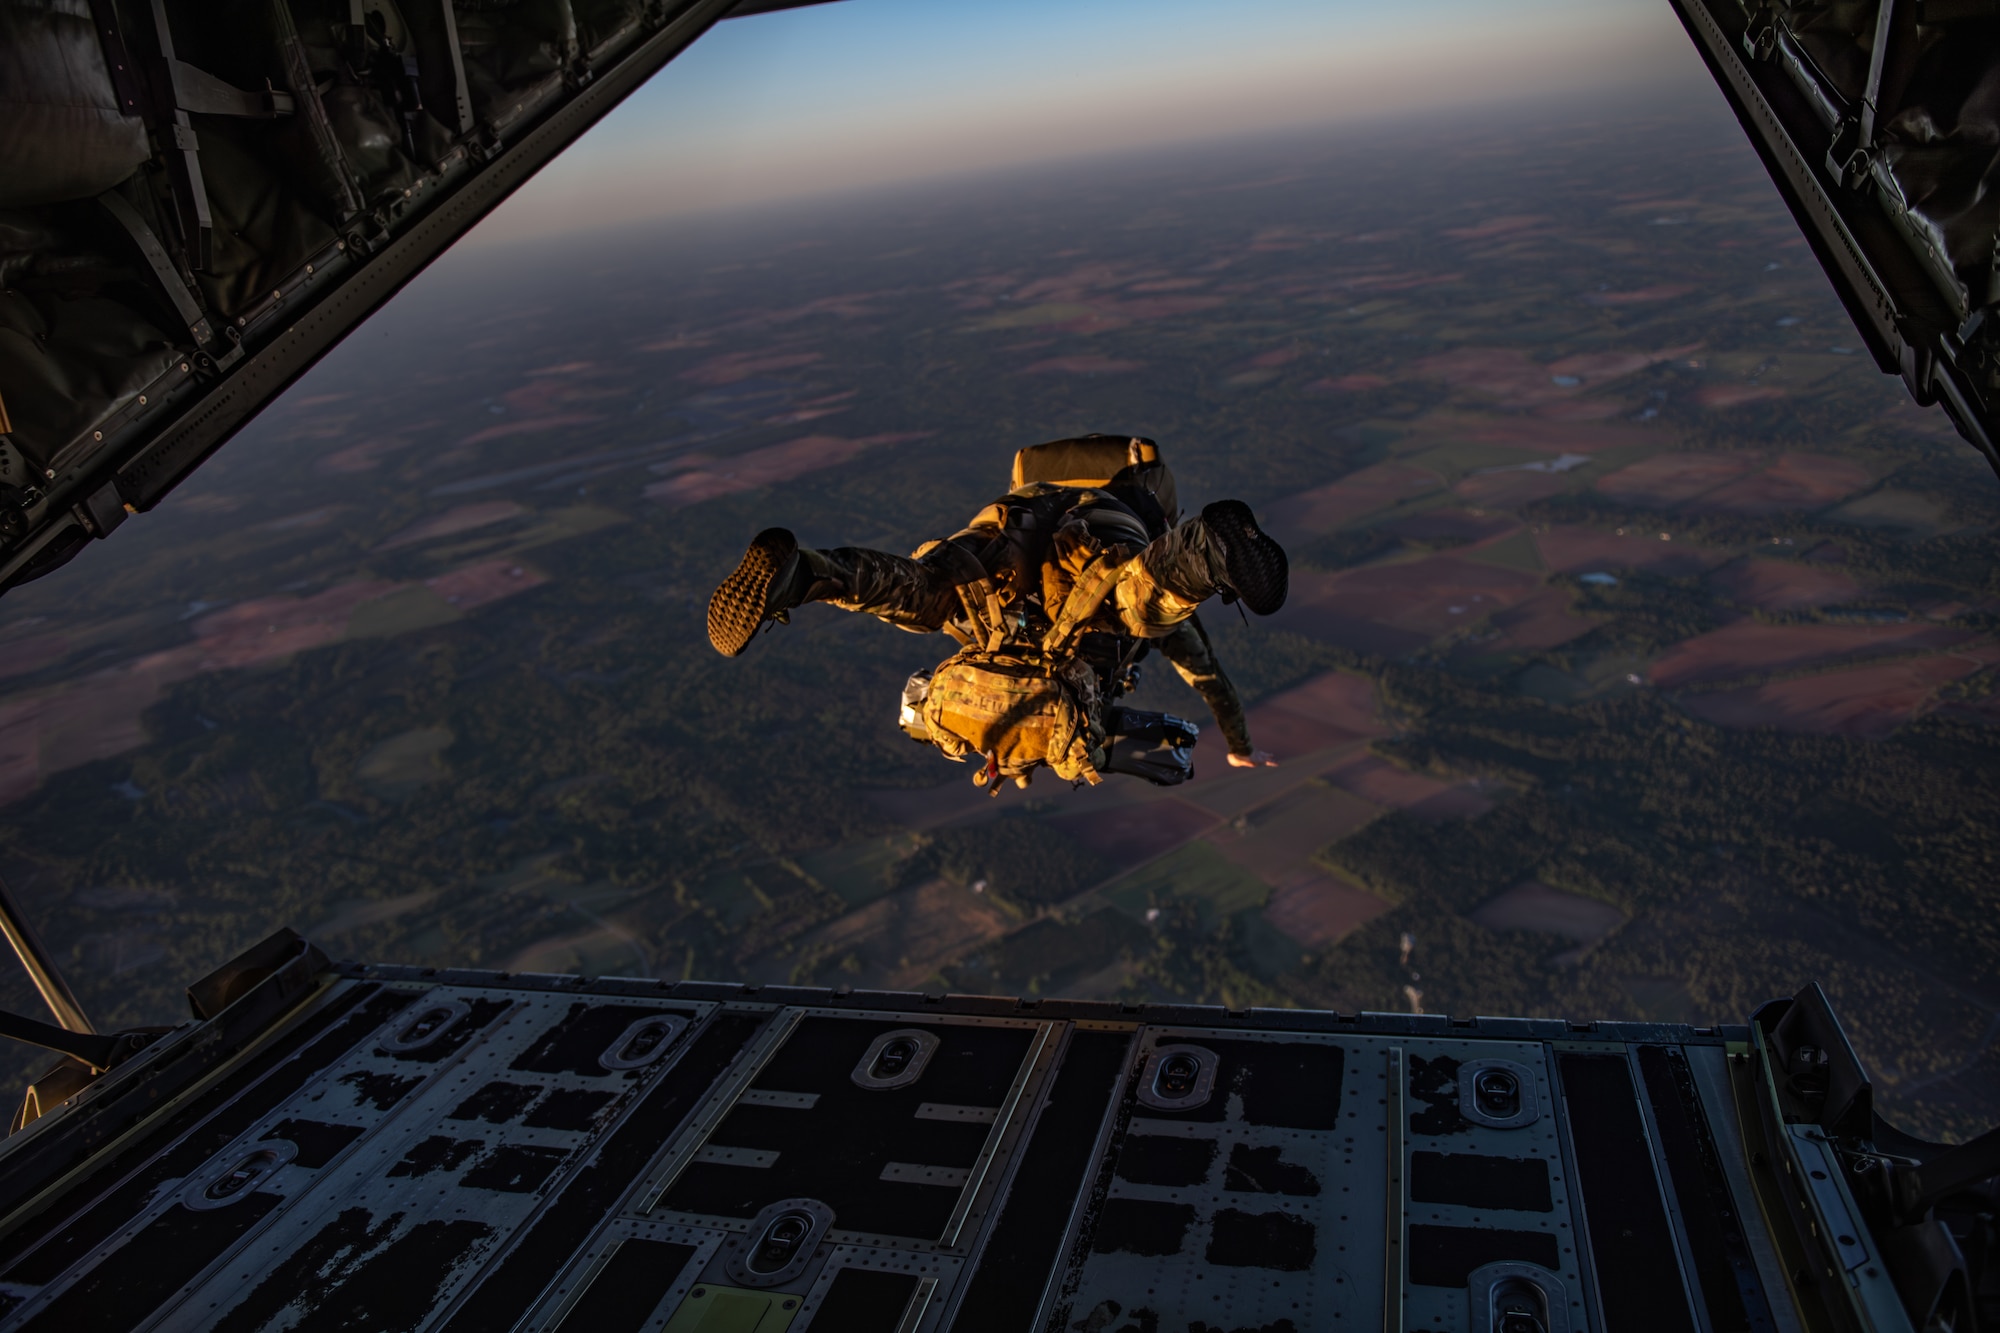 A U.S. Air Force Airman assigned to the 38th Rescue Squadron performs a military free fall jump from an HC-130J Combat King II during Exercise Ready Tiger 24-1, April 12, 2024. The exercise simulated a downed pilot scenario which tested the combat search and rescue team’s ability to respond at a moment's notice. During Ready Tiger 24-1, exercise inspectors will assess the 23rd Wing's proficiency in employing decentralized command and control to fulfill air tasking orders across geographically dispersed areas amid communication challenges, integrating Agile Combat Employment principles such as integrated combat turns, forward aerial refueling points, multi-capable Airmen, and combat search and rescue capabilities. (U.S. Air Force photo by Senior Airman Courtney Sebastianelli)